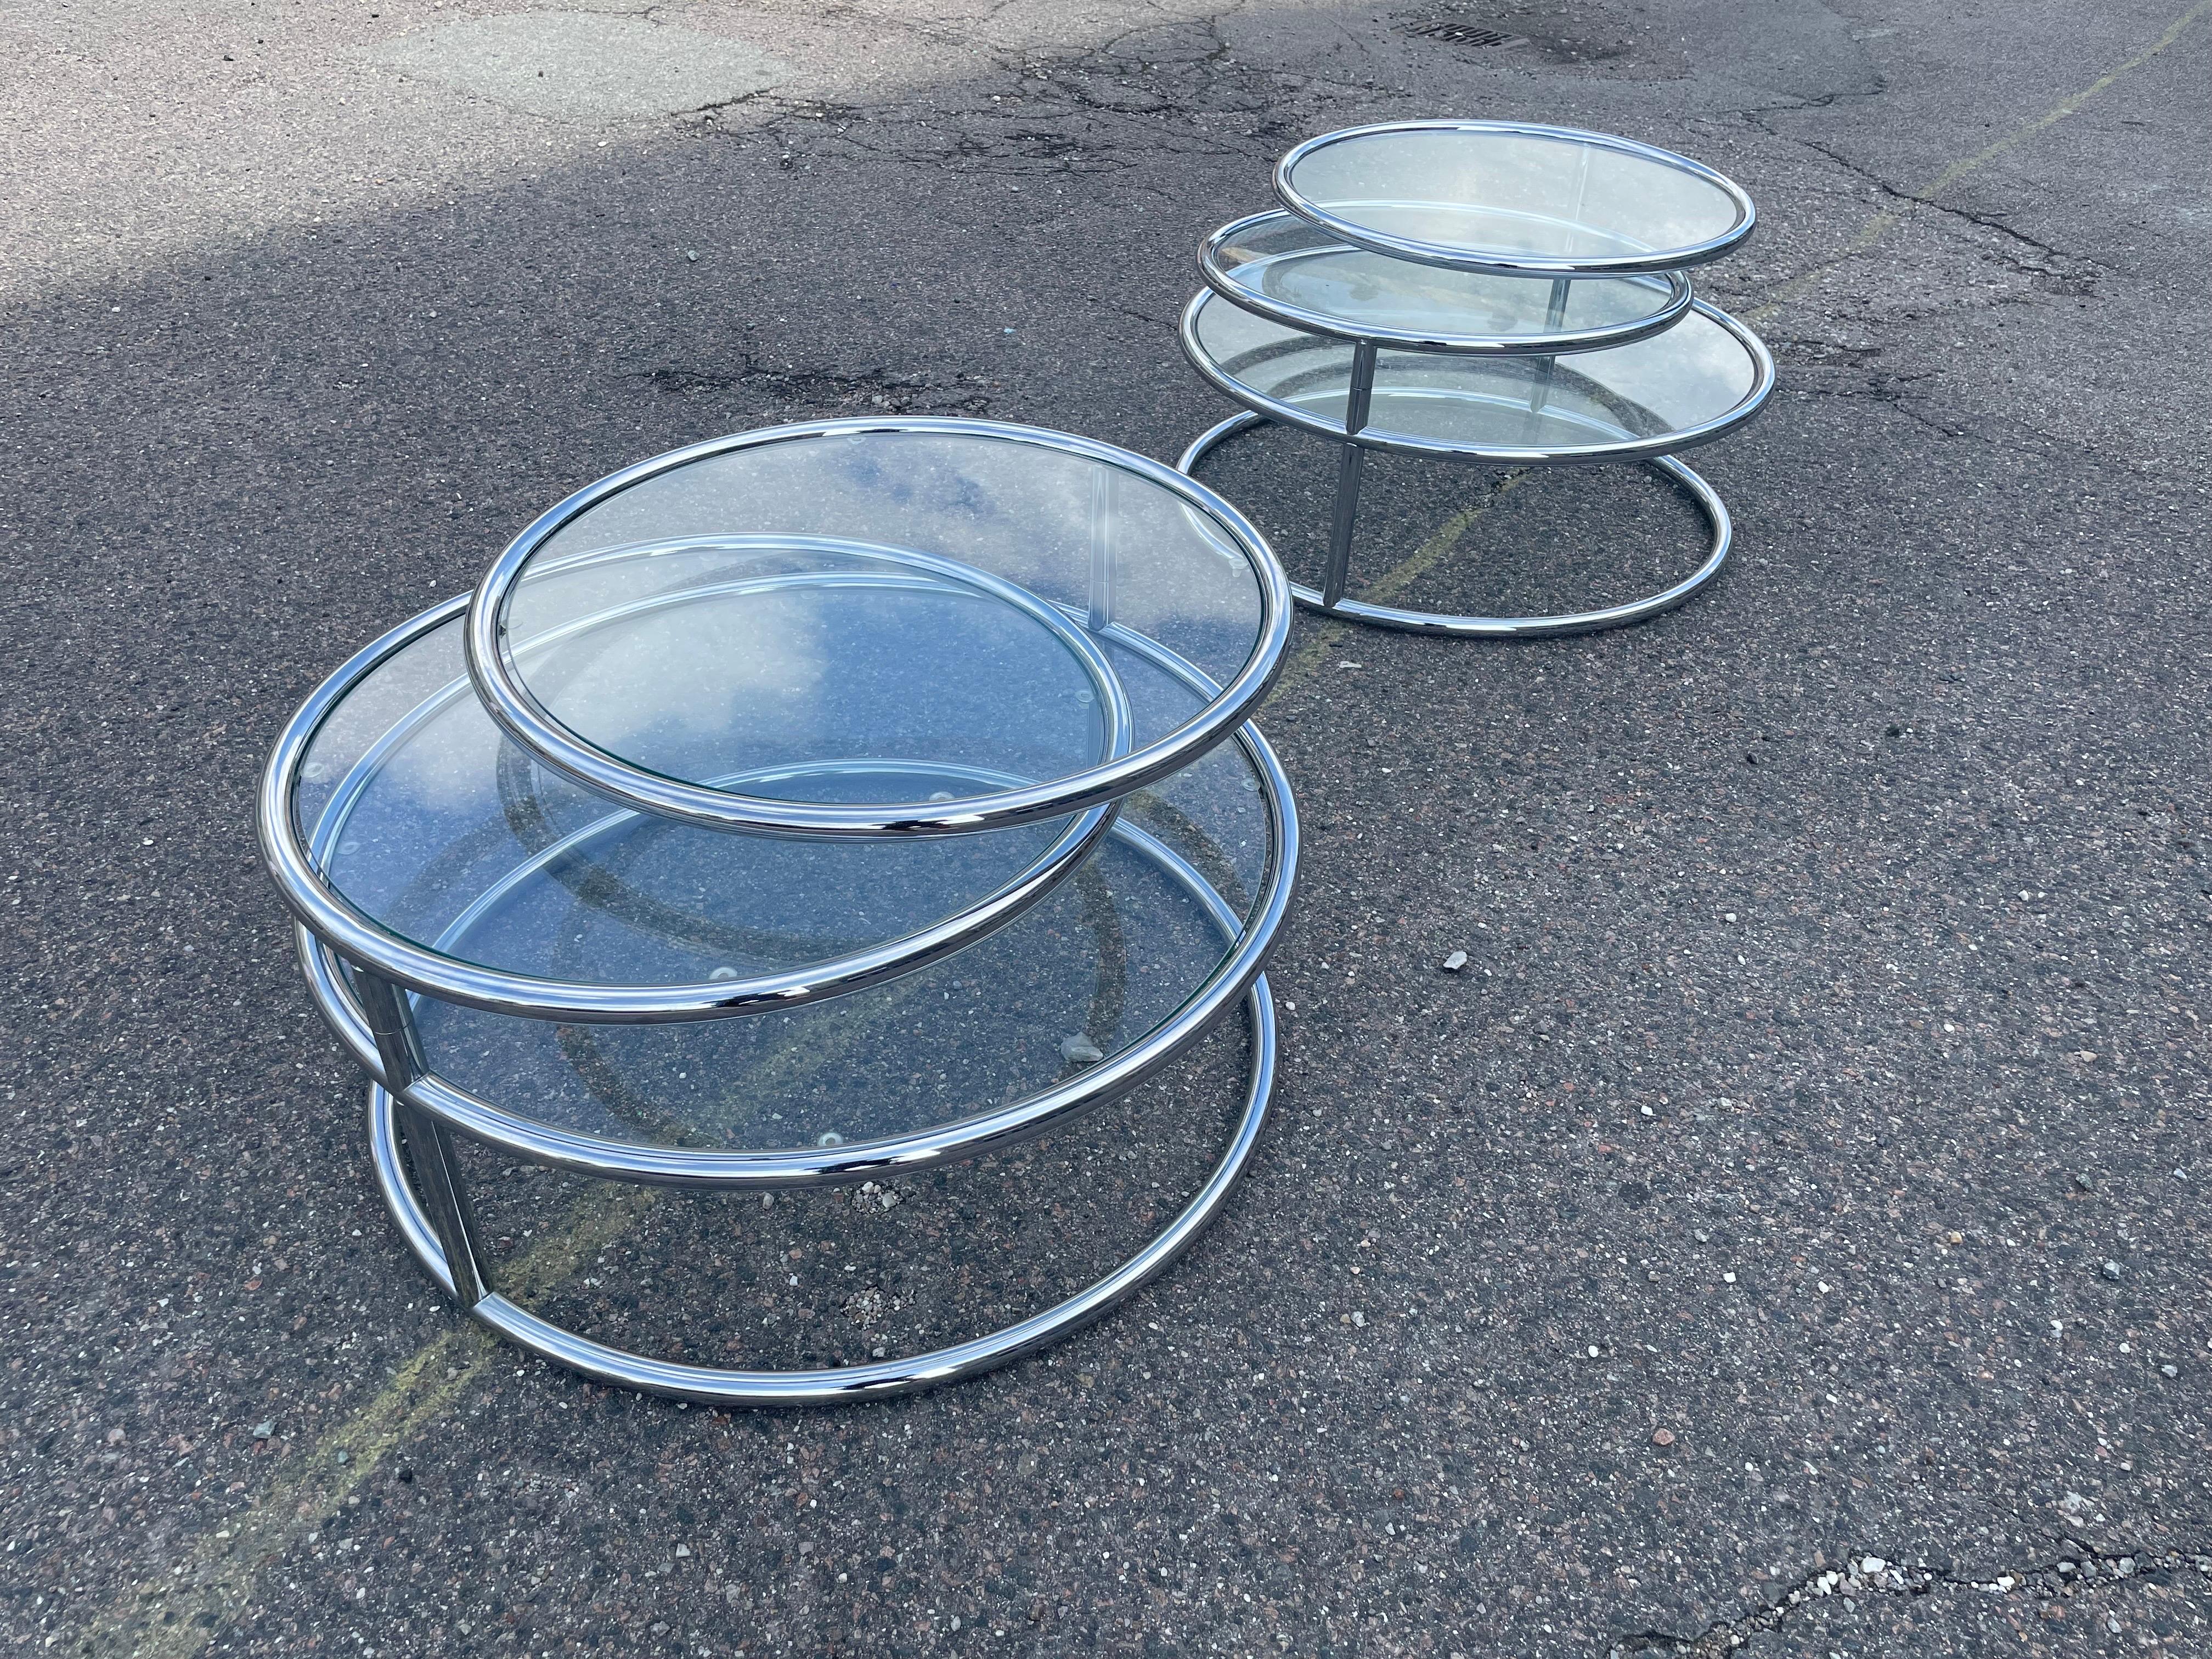 A pair of Italian Mid-Century Modern Space Age-style 1970's, Convertible' circular cocktail / coffee table with a chrome tube frame. (MOREX). In perfect condition 41 cm height, diameter bottom table 76 cm, and the two swirvel tables are 60 cm in